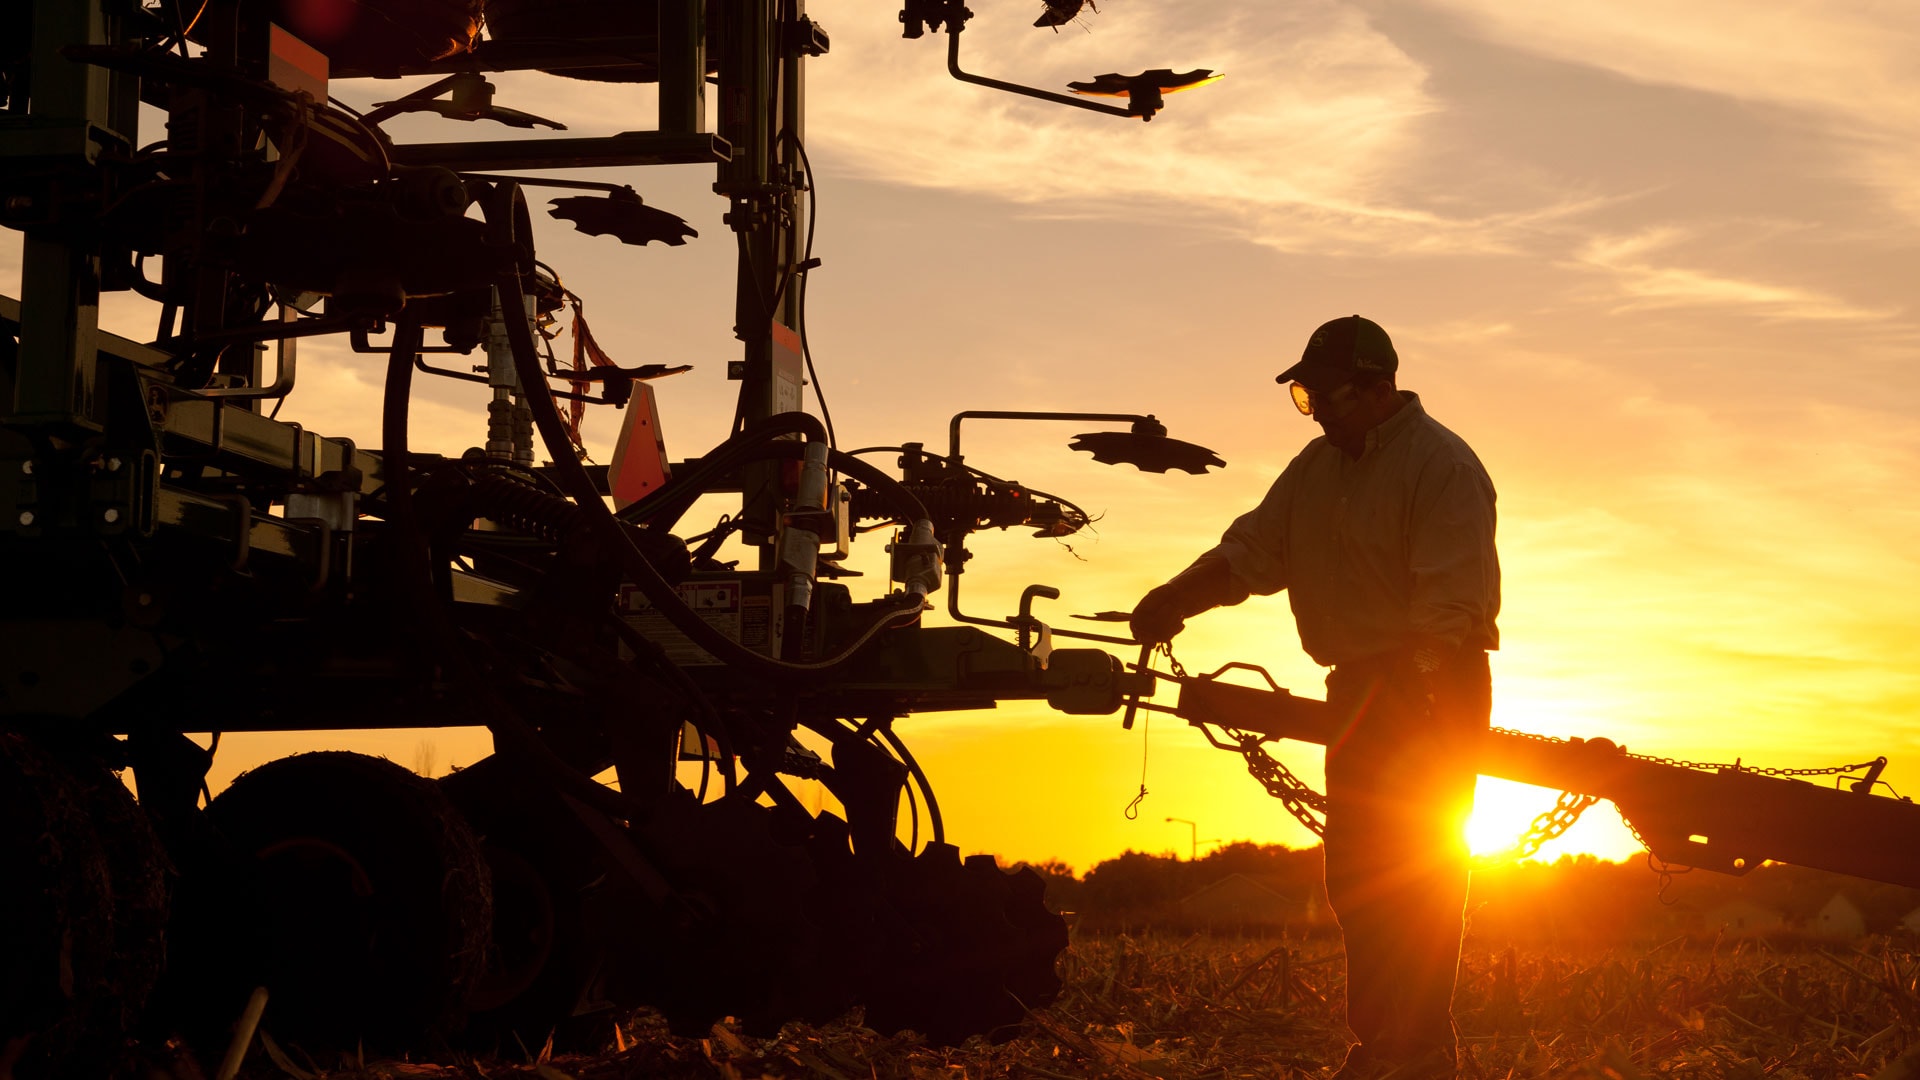 sunrise/sunset of sprayer equipment out in the field